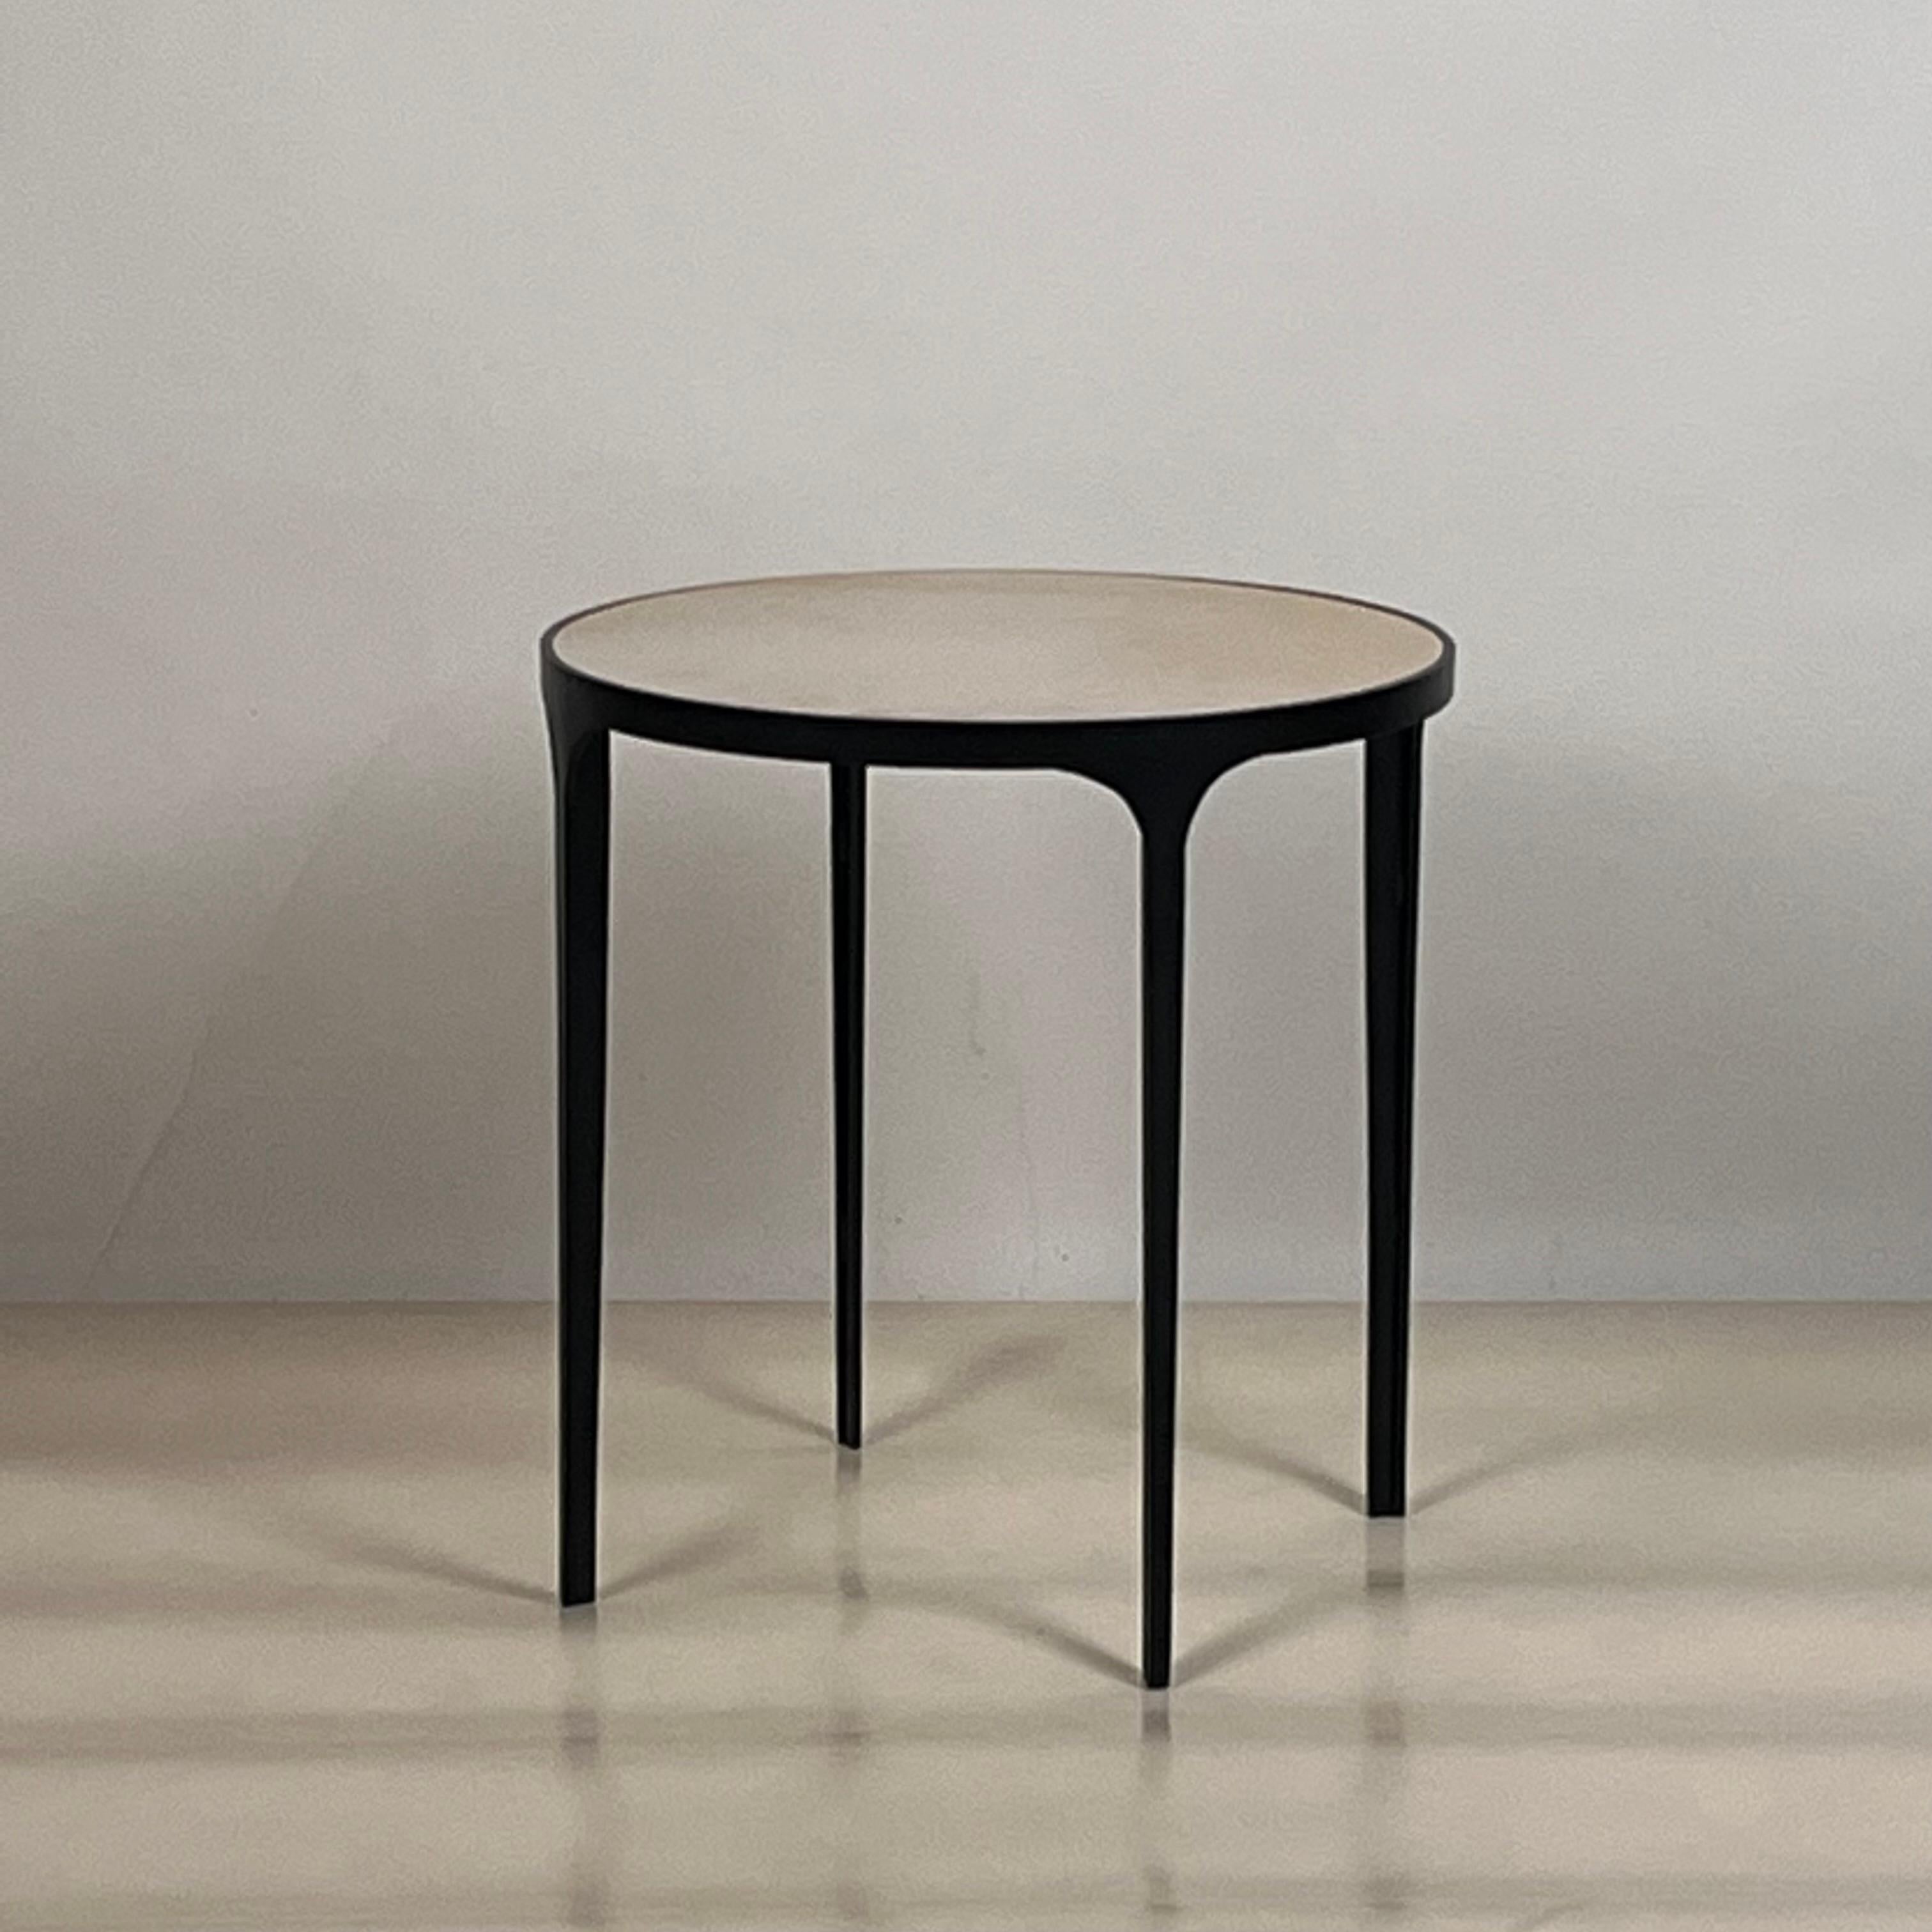 Round 'Esquisse'™ wrought iron and parchment side table by DESIGN FRÈRES®.

Real parchment-clad top. Chic and understated.

This Esquisse™ table is an exclusive DESIGN FRÈRES® design. Parchment is a natural material and surface patterns may vary.